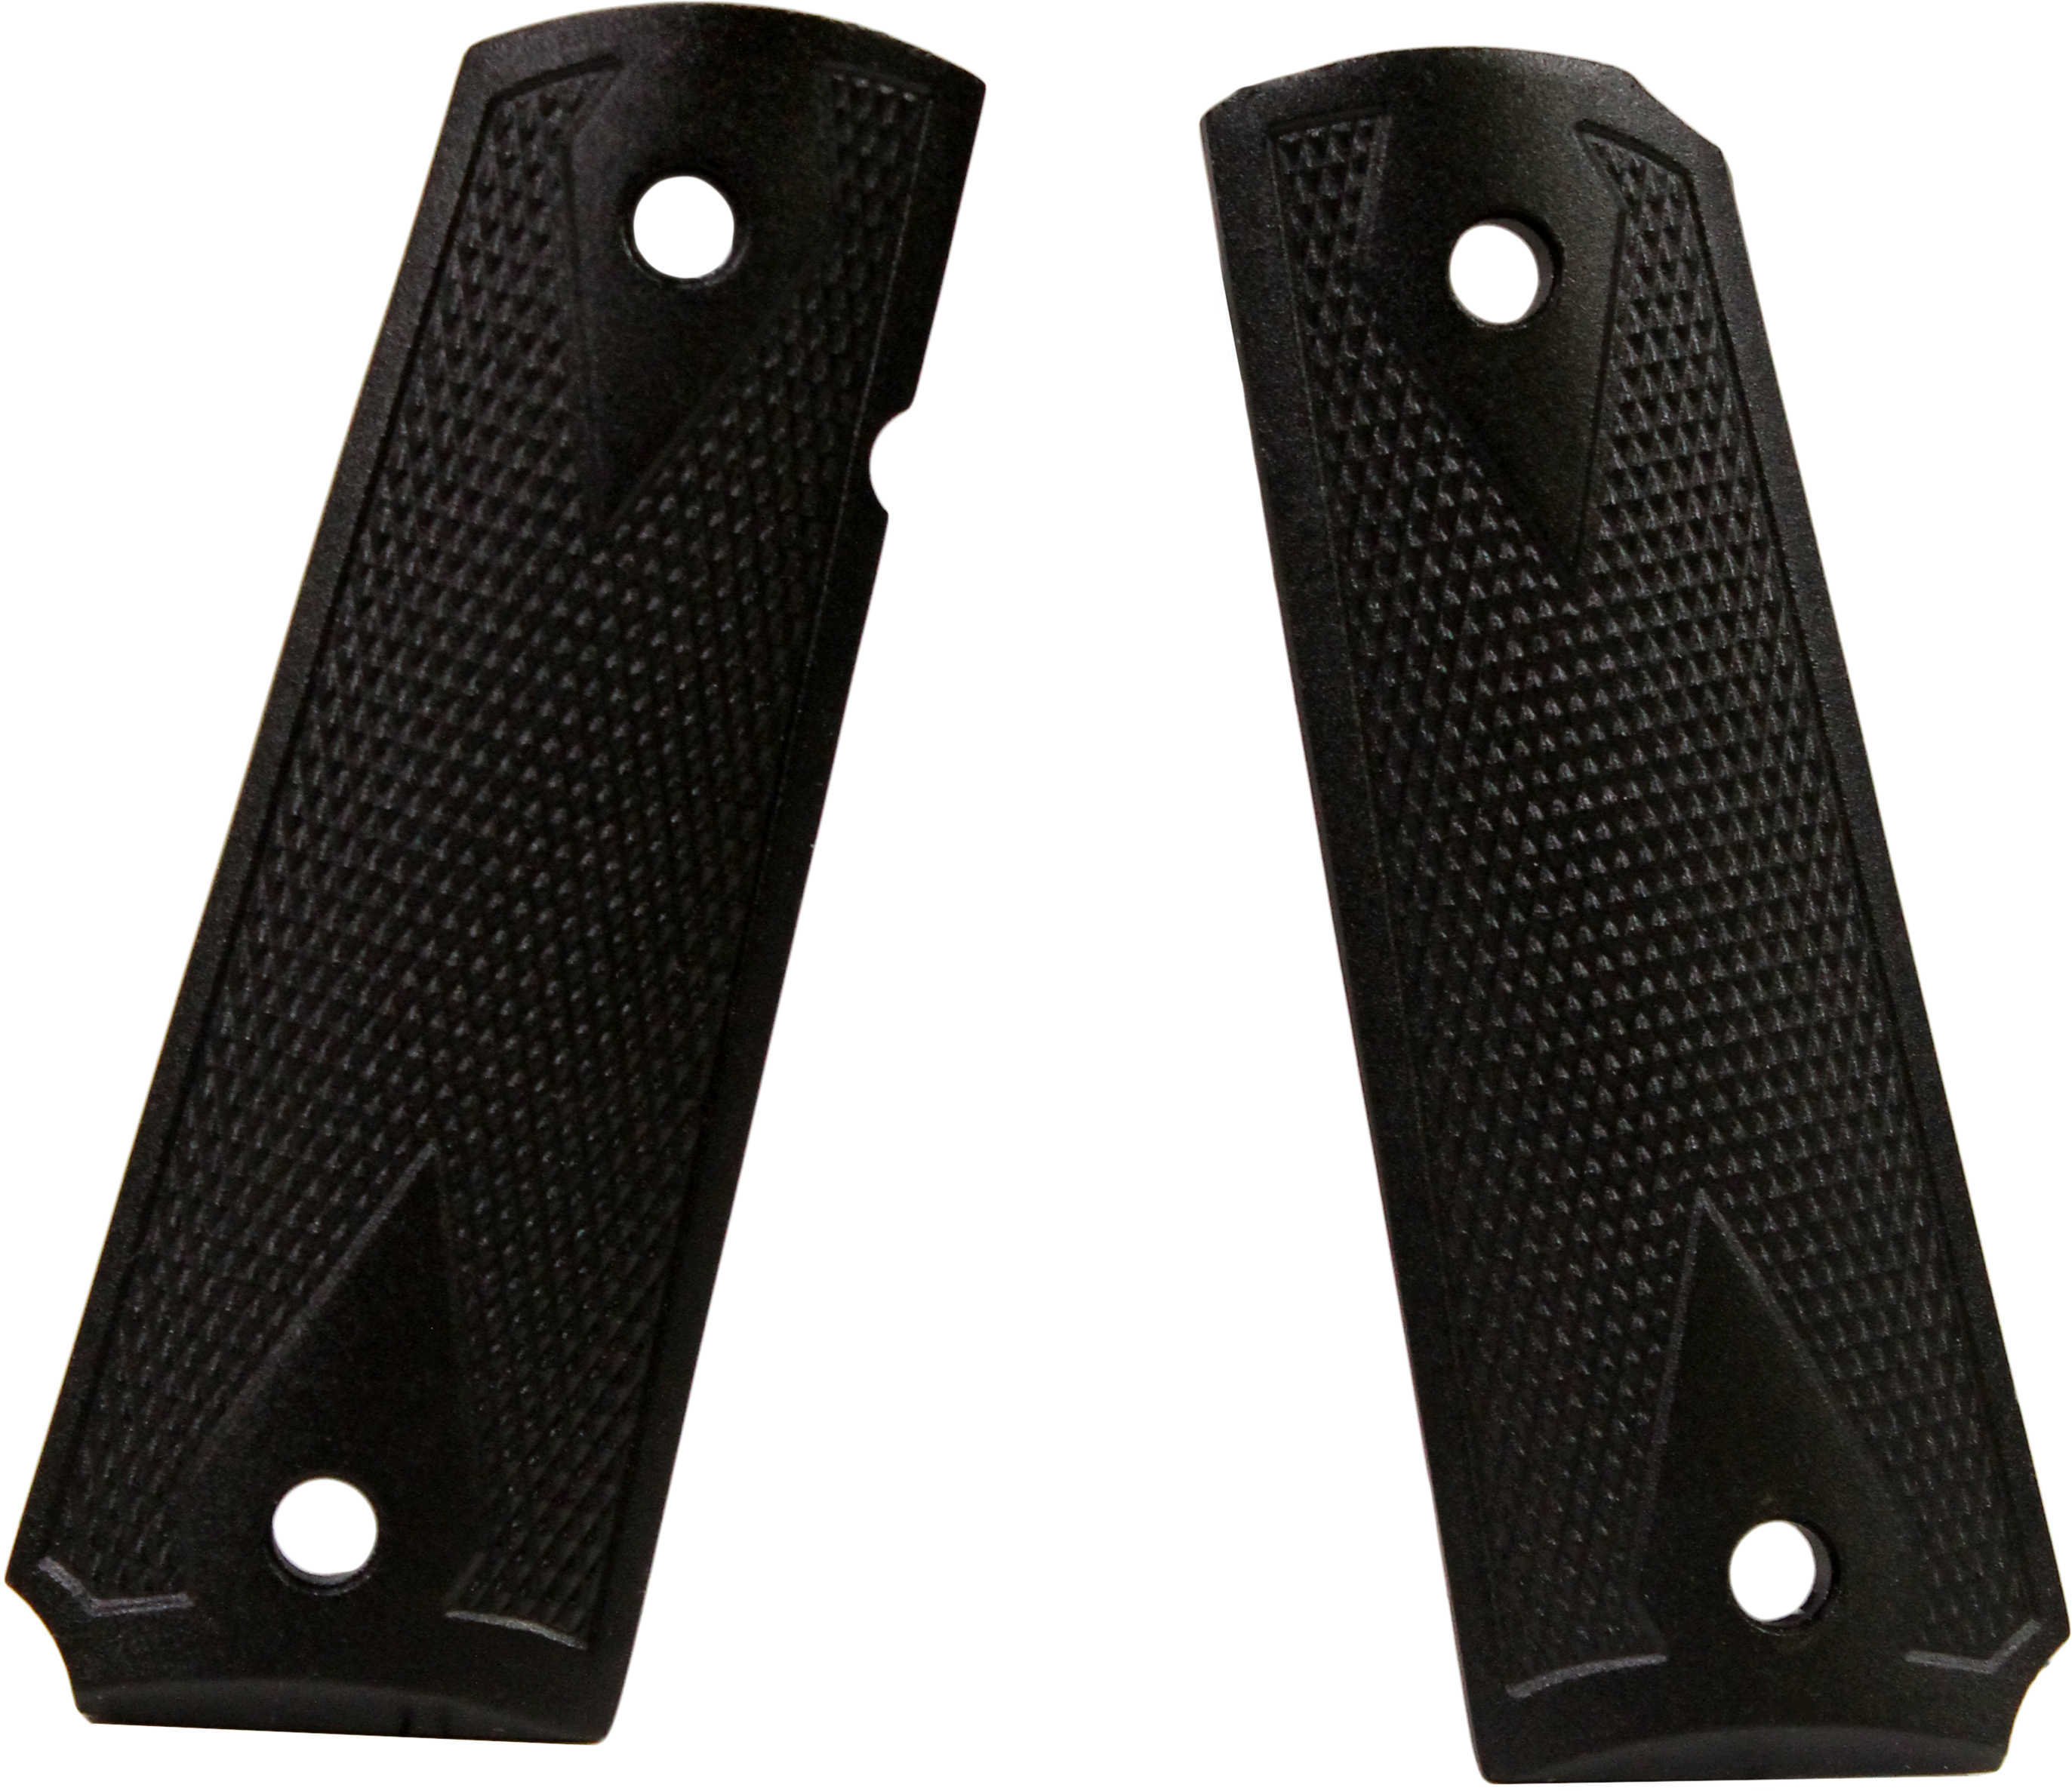 Pachmayr Aluminum Grips For 1911 Checkered Black